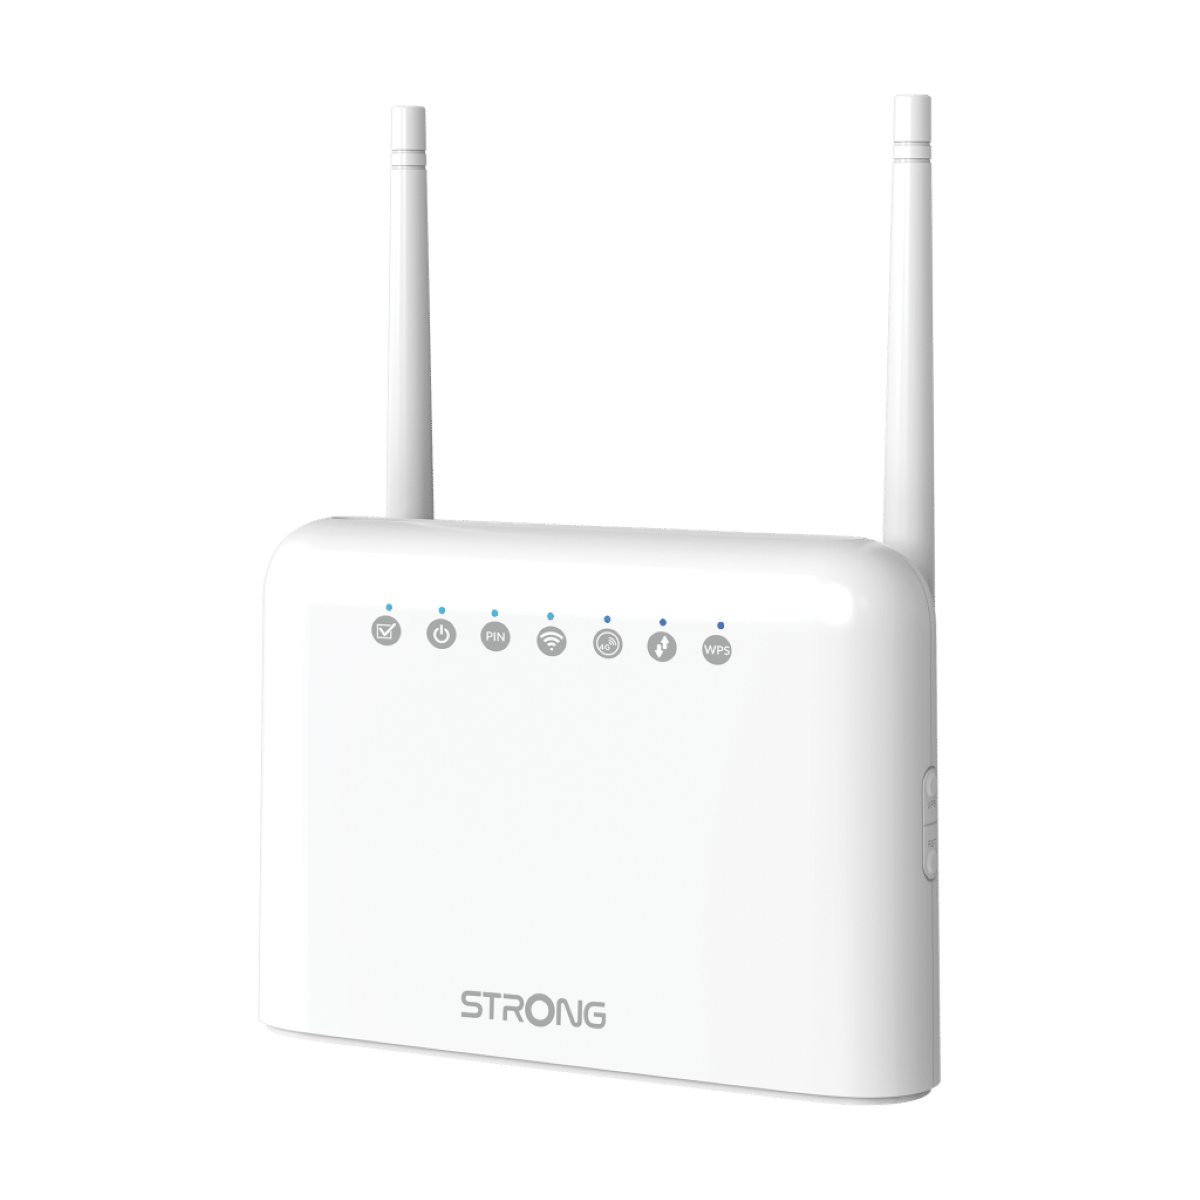 STRONG 4G WLAN Router LTE 350 Router